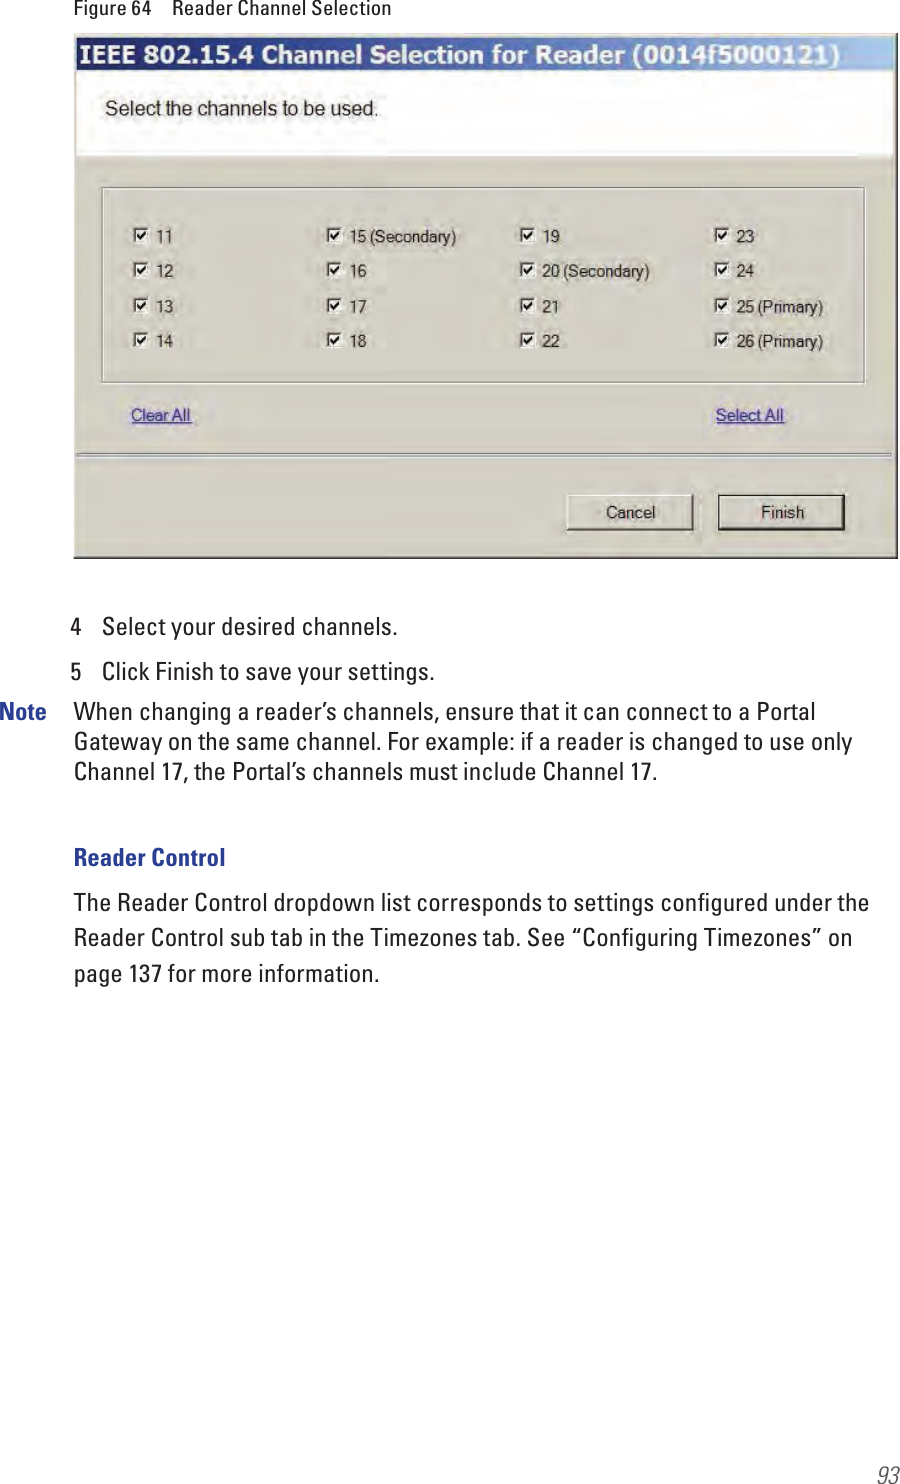 93Figure 64  Reader Channel Selection4  Select your desired channels.5  Click Finish to save your settings.Note  When changing a reader’s channels, ensure that it can connect to a Portal Gateway on the same channel. For example: if a reader is changed to use only Channel 17, the Portal’s channels must include Channel 17.Reader ControlThe Reader Control dropdown list corresponds to settings conﬁgured under the Reader Control sub tab in the Timezones tab. See “Conﬁguring Timezones” on page 137 for more information.